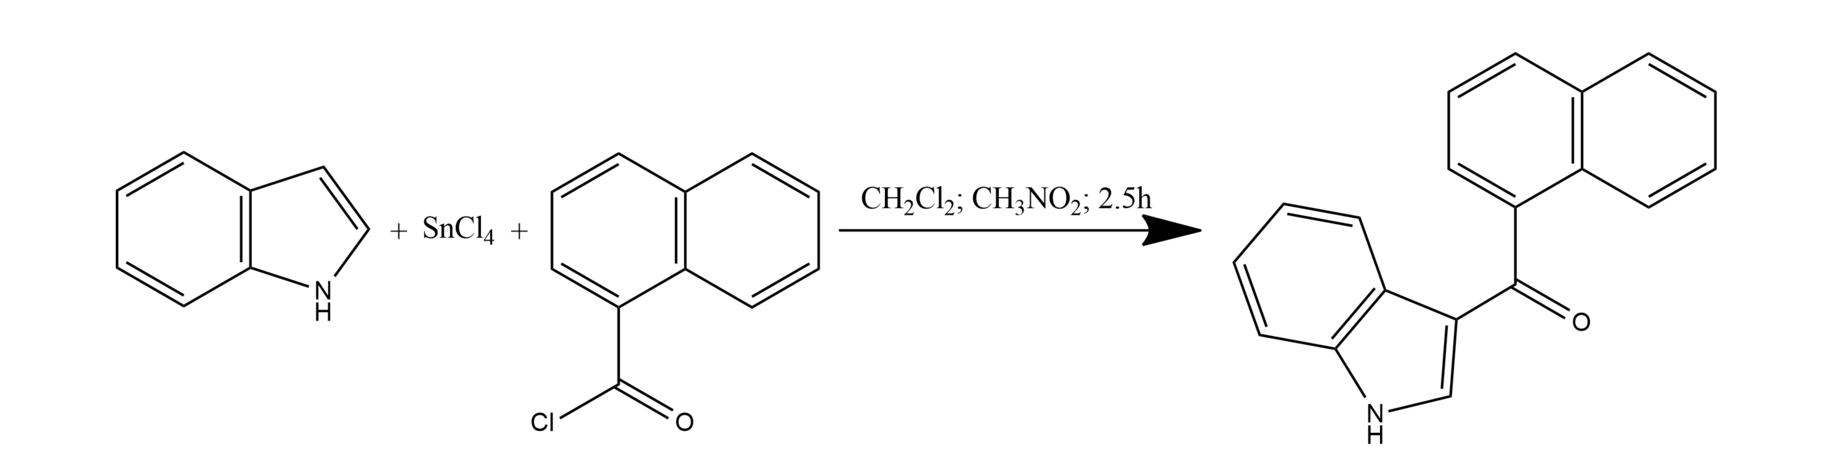 Synthesis of 3-(1-naphthoyl)indole (naf-indole, intermediate JWHs) (large scale) CAS 109555-87-5.png